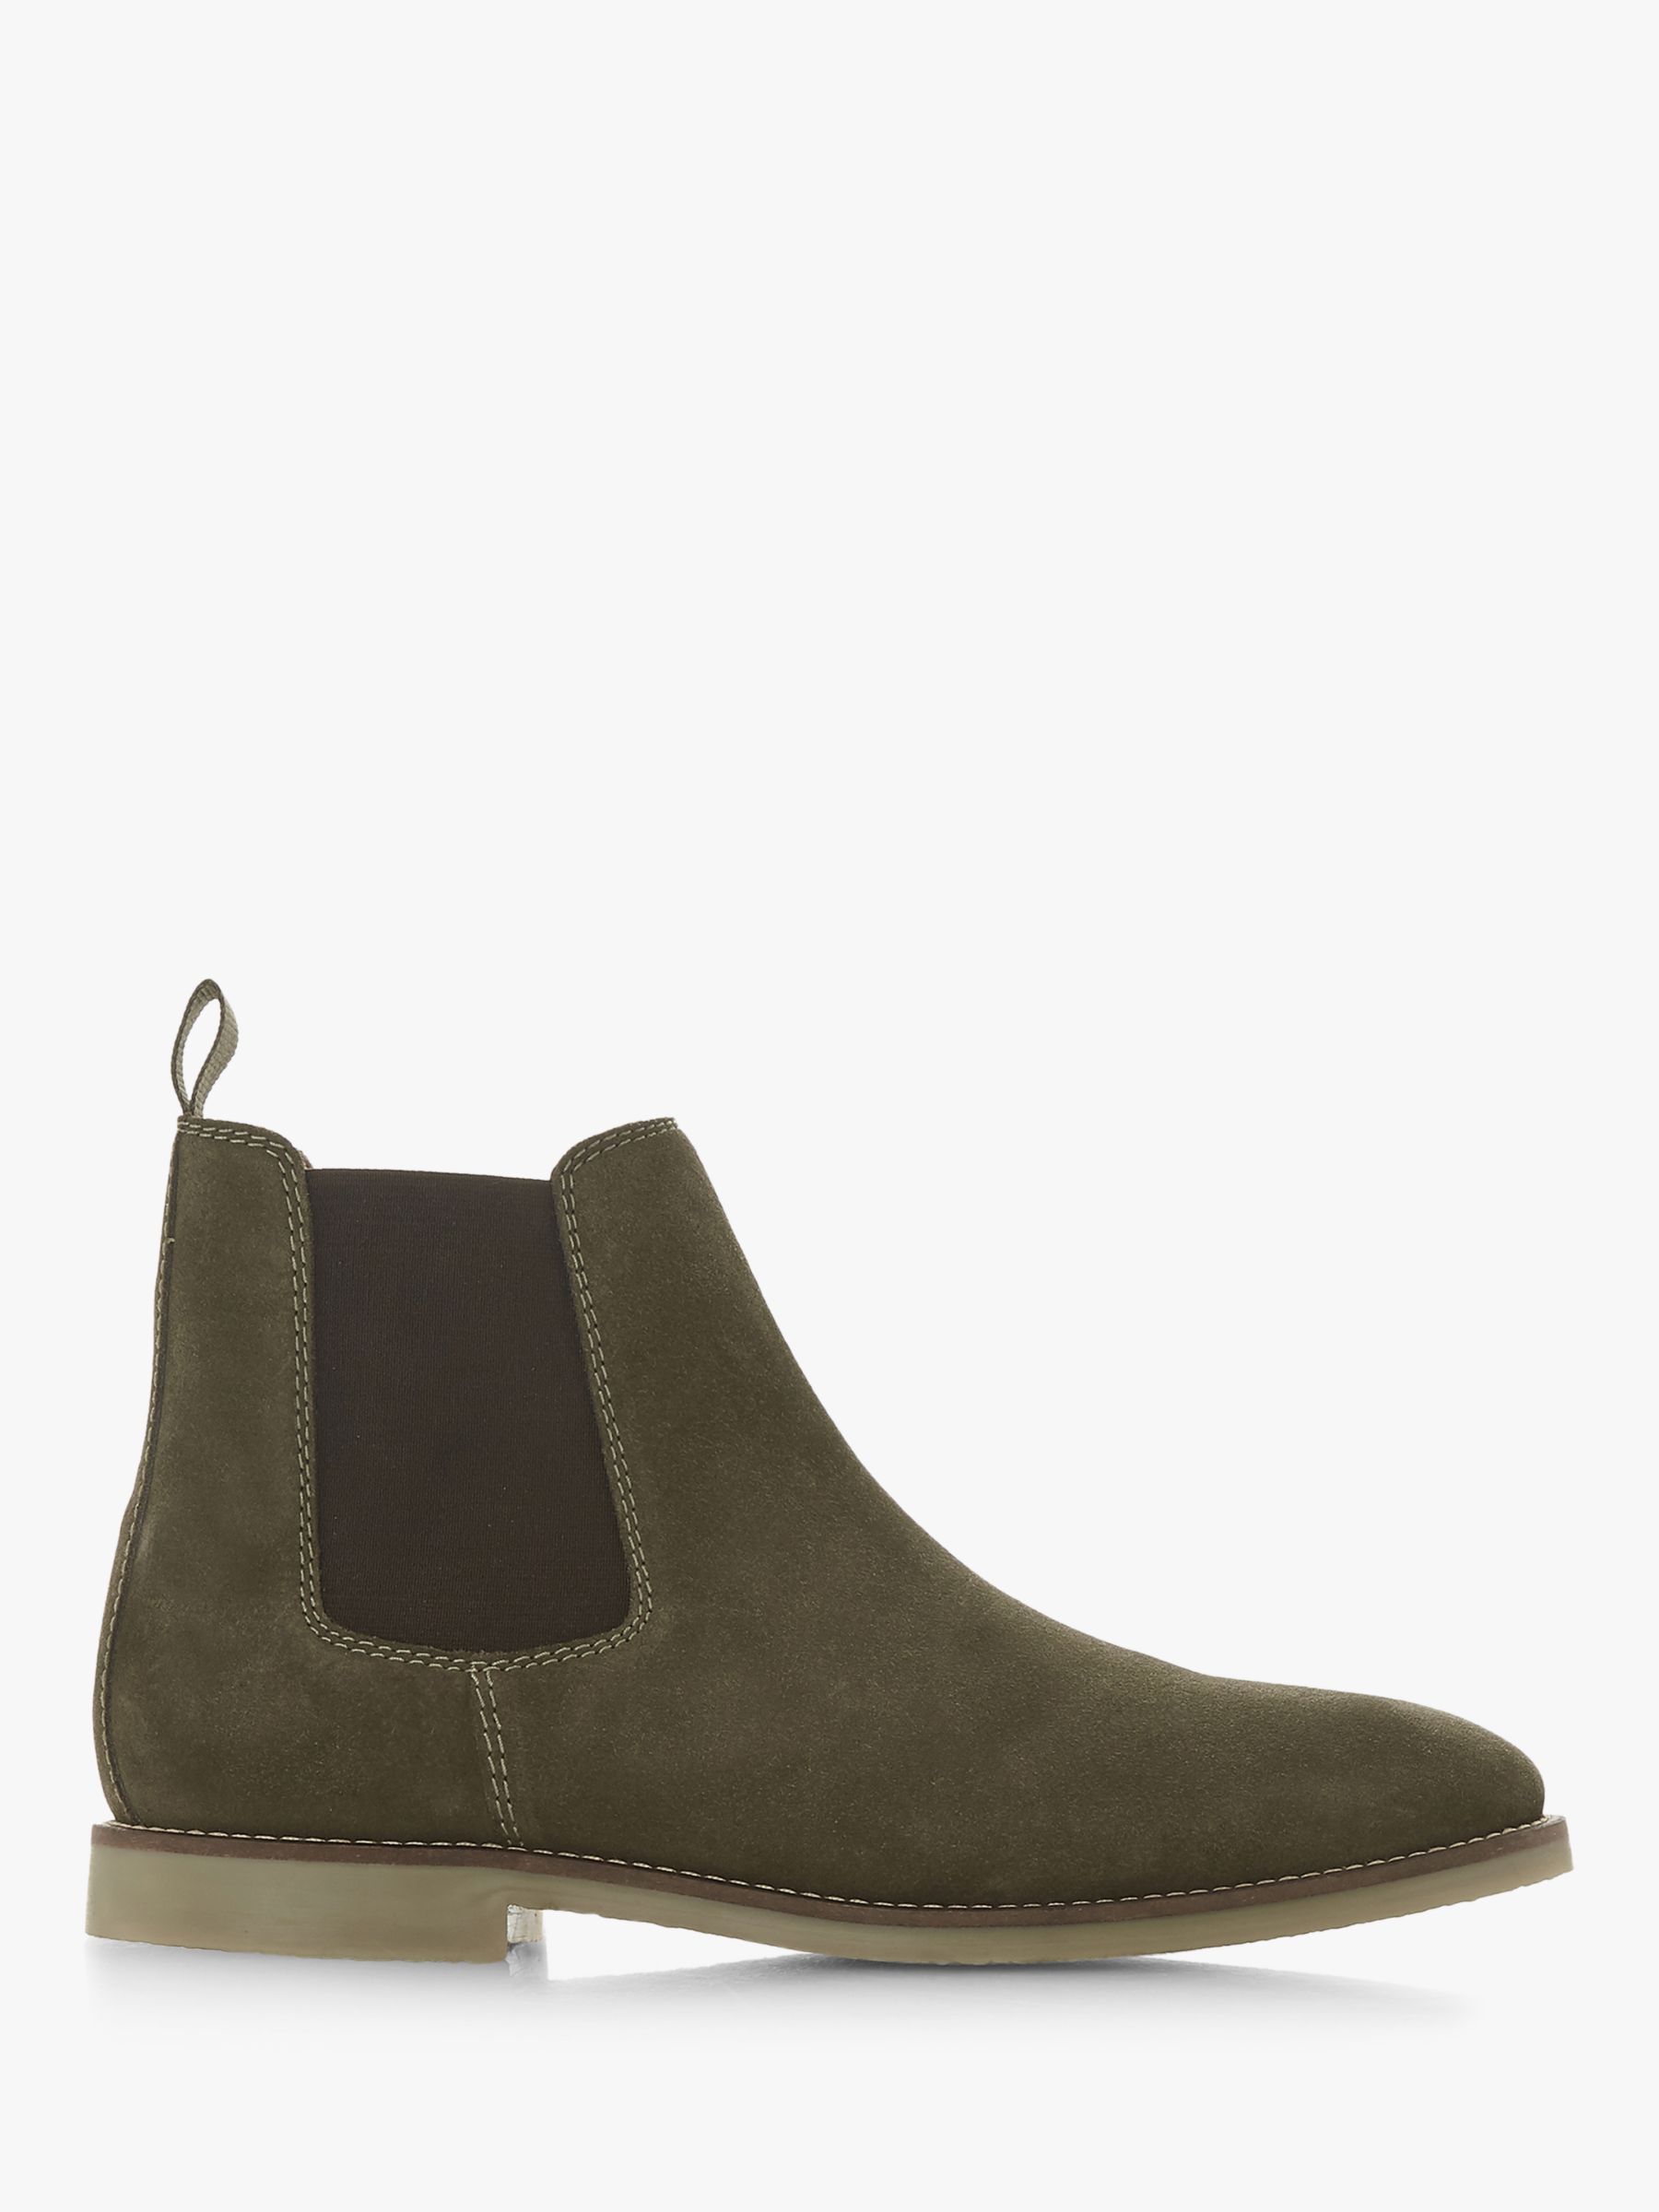 Dune Calzaghe Suede Chelsea Boots, Khaki at John Lewis & Partners